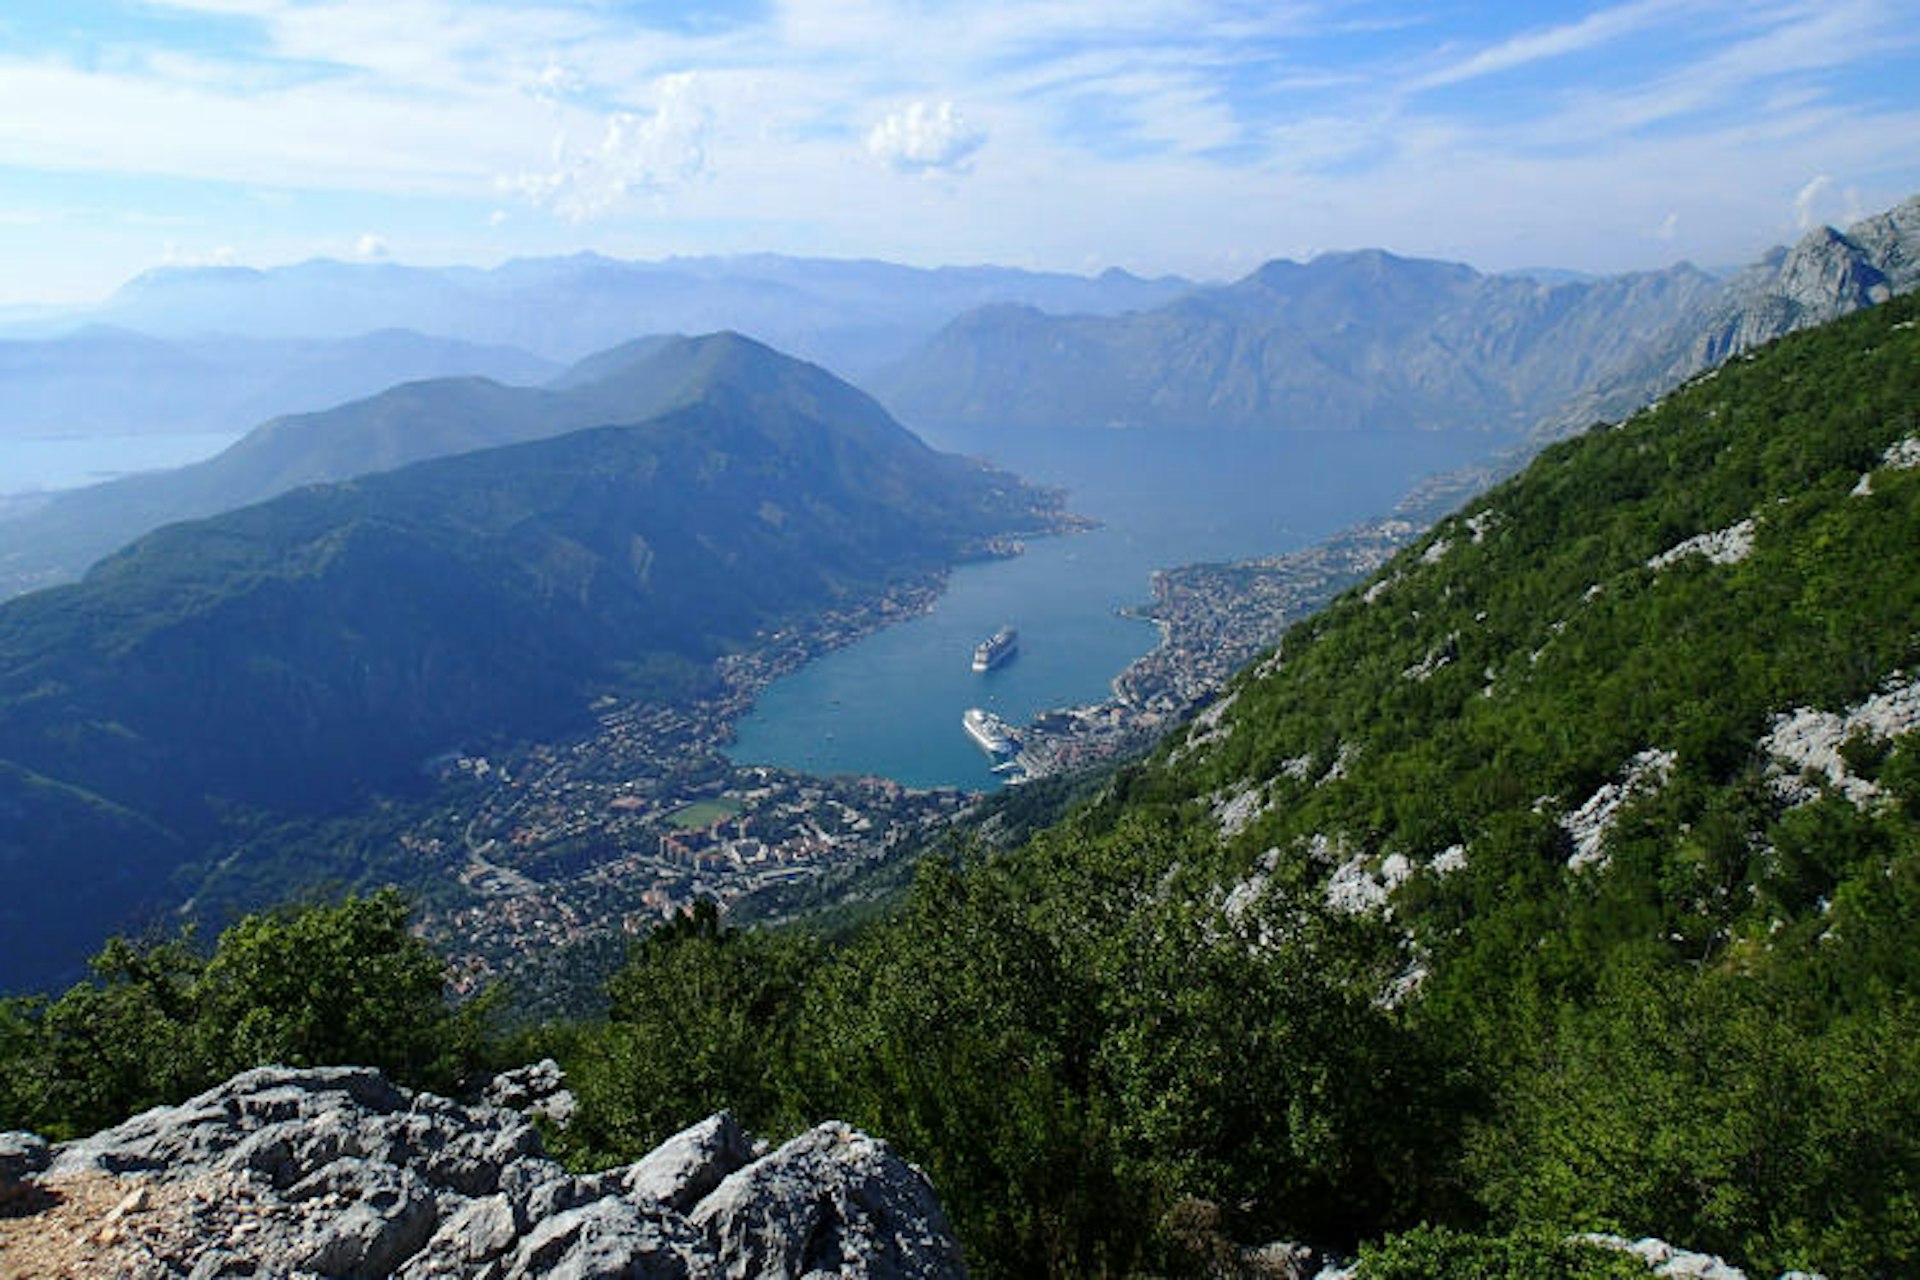 View over the Bay of Kotor from Mt Lovćen. Image by Sarahtz / CC BY 2.0